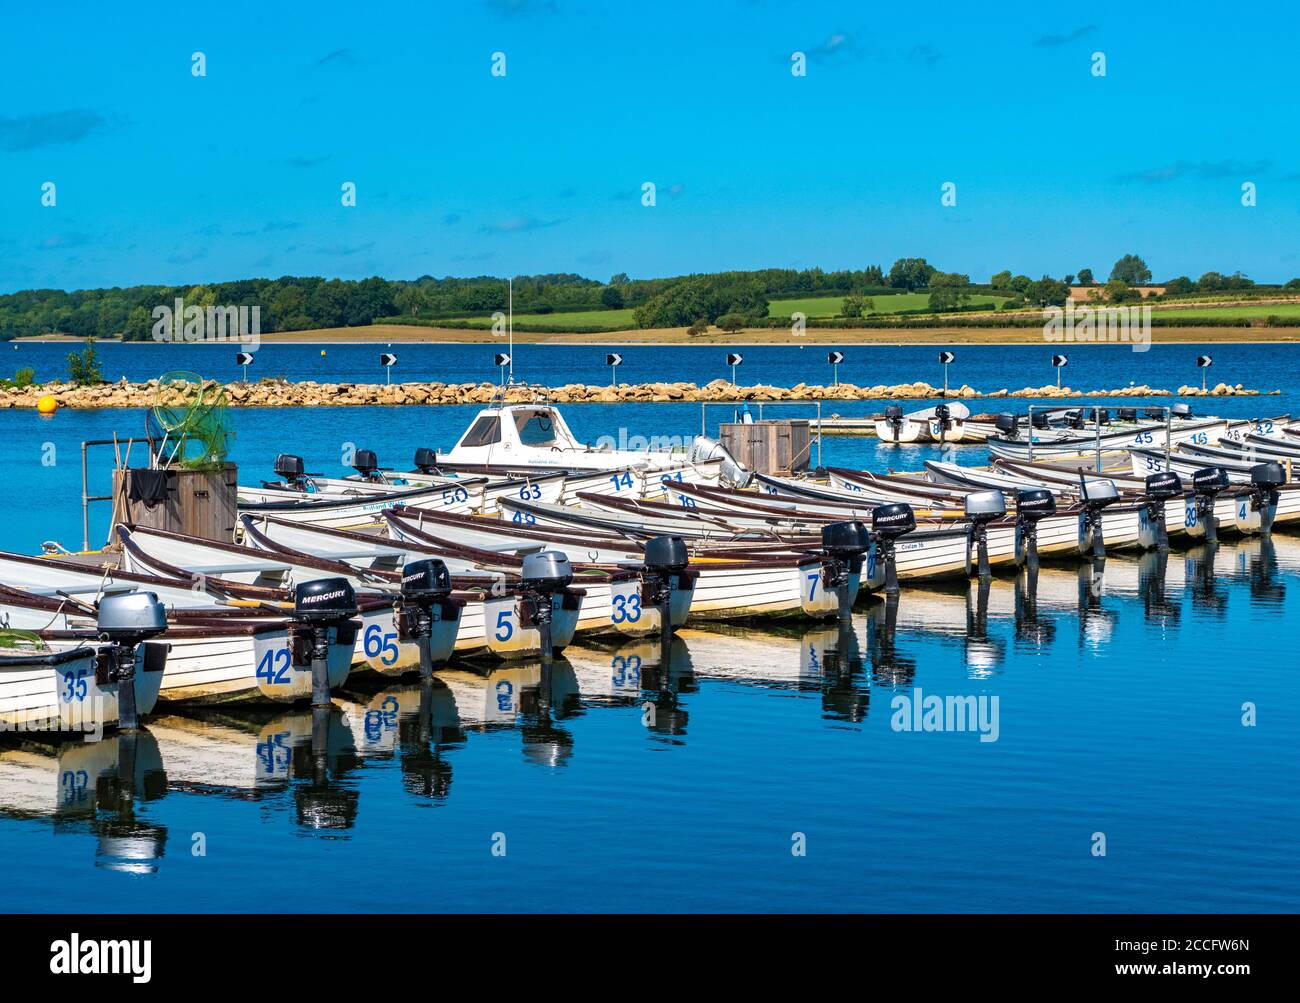 A line of unmanned motor boats for fishing on Rutland Water – a reservoir, artificial lake and nature reserve in Rutland, England, UK. Stock Photo